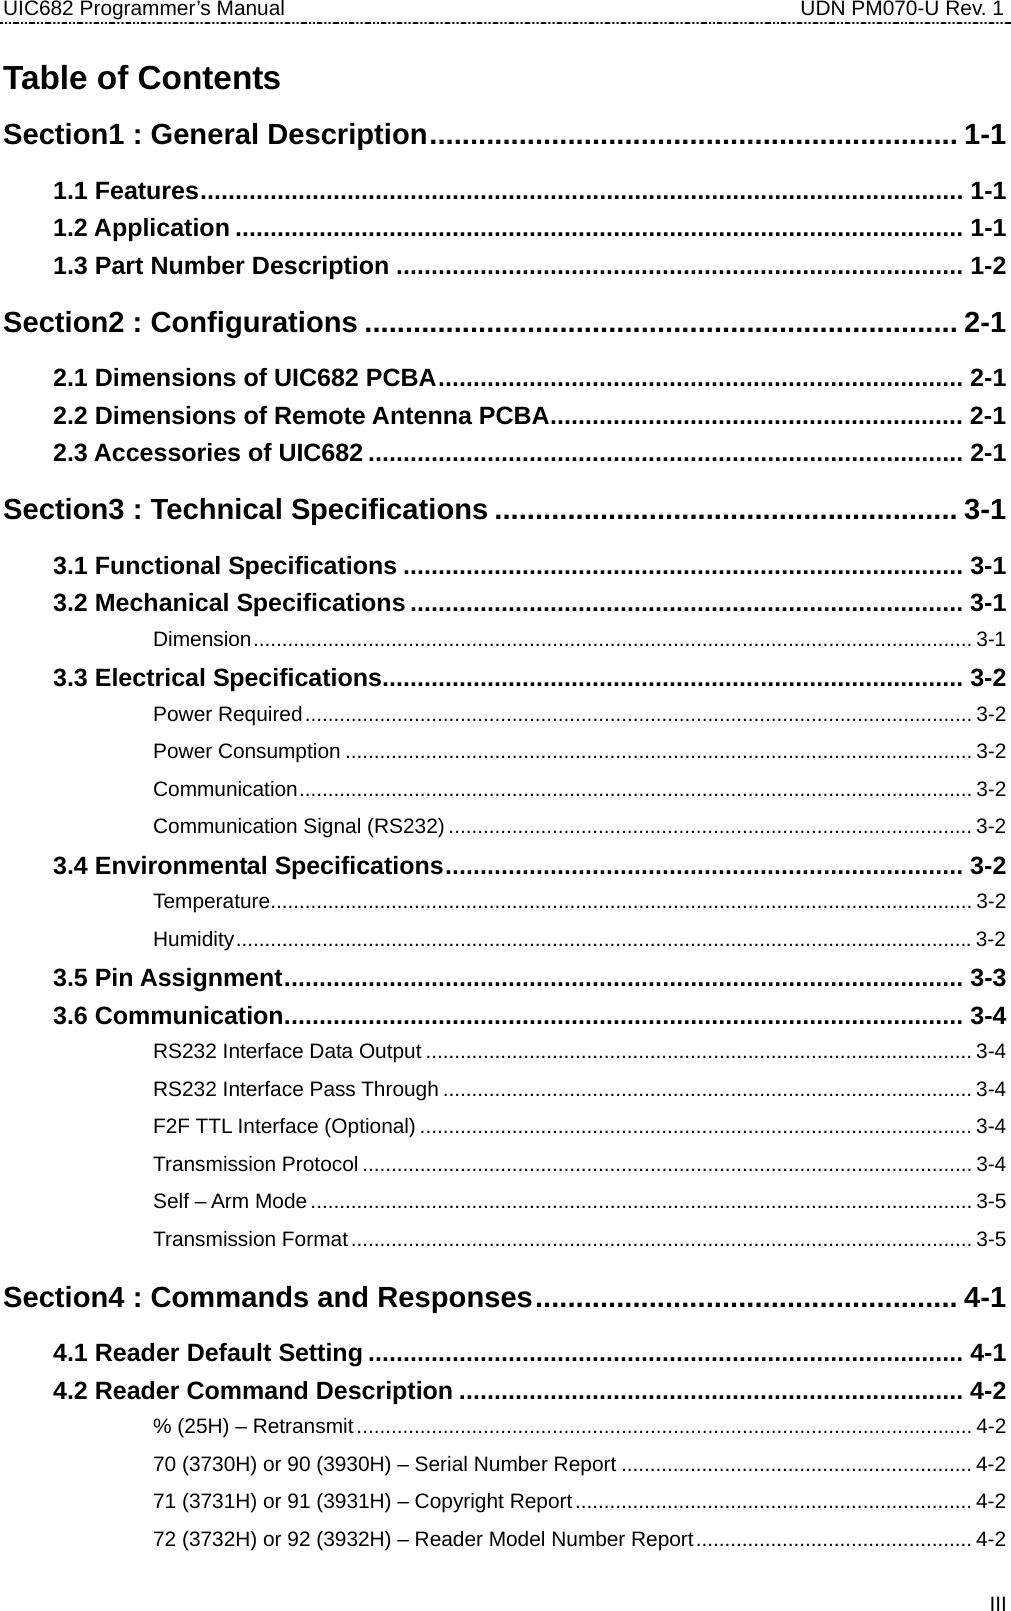 UIC682 Programmer’s Manual                                     UDN PM070-U Rev. 1 Table of Contents Section1 : General Description................................................................. 1-1 1.1 Features............................................................................................................. 1-1 1.2 Application ........................................................................................................ 1-1 1.3 Part Number Description ................................................................................. 1-2 Section2 : Configurations ......................................................................... 2-1 2.1 Dimensions of UIC682 PCBA........................................................................... 2-1 2.2 Dimensions of Remote Antenna PCBA........................................................... 2-1 2.3 Accessories of UIC682 ..................................................................................... 2-1 Section3 : Technical Specifications ......................................................... 3-1 3.1 Functional Specifications ................................................................................ 3-1 3.2 Mechanical Specifications............................................................................... 3-1 　 Dimension............................................................................................................................. 3-1 3.3 Electrical Specifications................................................................................... 3-2 　 Power Required.................................................................................................................... 3-2 　 Power Consumption ............................................................................................................. 3-2 　 Communication..................................................................................................................... 3-2 　 Communication Signal (RS232) ........................................................................................... 3-2 3.4 Environmental Specifications.......................................................................... 3-2 　 Temperature.......................................................................................................................... 3-2 　 Humidity................................................................................................................................3-2 3.5 Pin Assignment................................................................................................. 3-3 3.6 Communication................................................................................................. 3-4 　 RS232 Interface Data Output ............................................................................................... 3-4 　 RS232 Interface Pass Through ............................................................................................ 3-4 　 F2F TTL Interface (Optional) ................................................................................................ 3-4 　 Transmission Protocol.......................................................................................................... 3-4 　 Self – Arm Mode ................................................................................................................... 3-5 　 Transmission Format............................................................................................................ 3-5 Section4 : Commands and Responses.................................................... 4-1 4.1 Reader Default Setting ..................................................................................... 4-1 4.2 Reader Command Description ........................................................................ 4-2 　 % (25H) – Retransmit........................................................................................................... 4-2 　 70 (3730H) or 90 (3930H) – Serial Number Report ............................................................. 4-2 　 71 (3731H) or 91 (3931H) – Copyright Report..................................................................... 4-2 　 72 (3732H) or 92 (3932H) – Reader Model Number Report................................................ 4-2  III